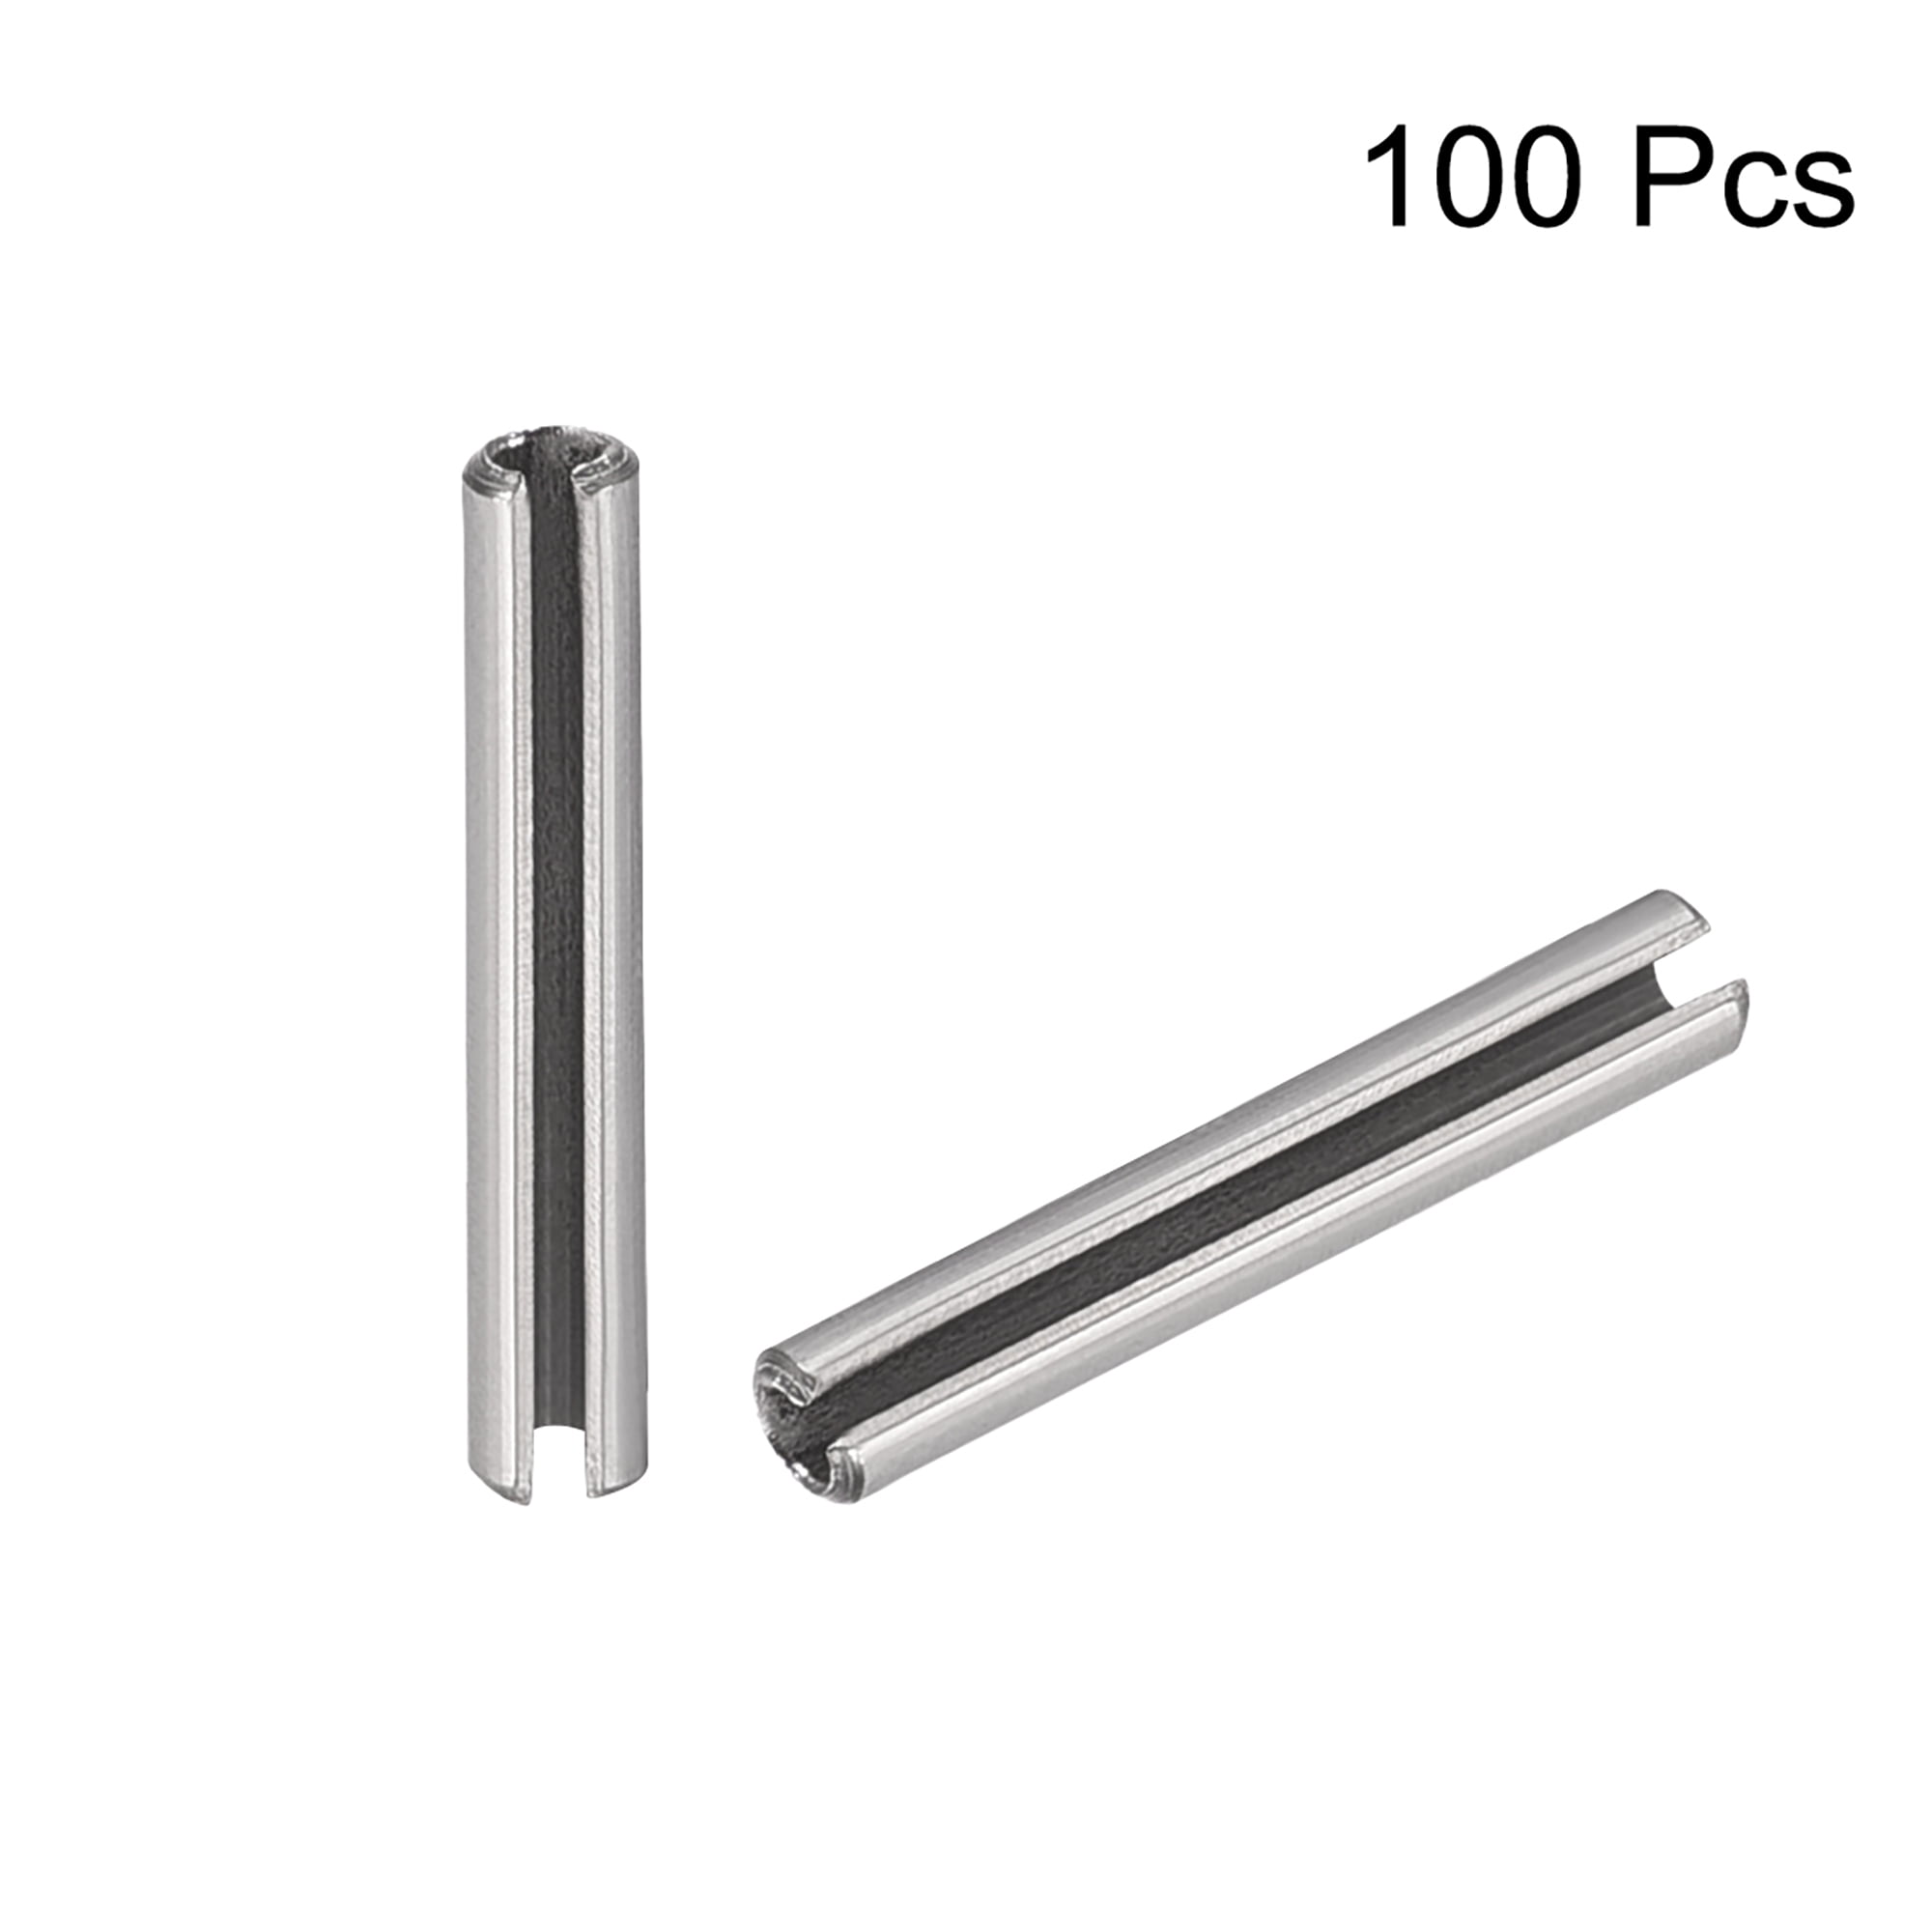 Details about   M6 x 25mm 304 Stainless Steel Split Spring Roll Dowel Pins Plain Finish 20Pcs 